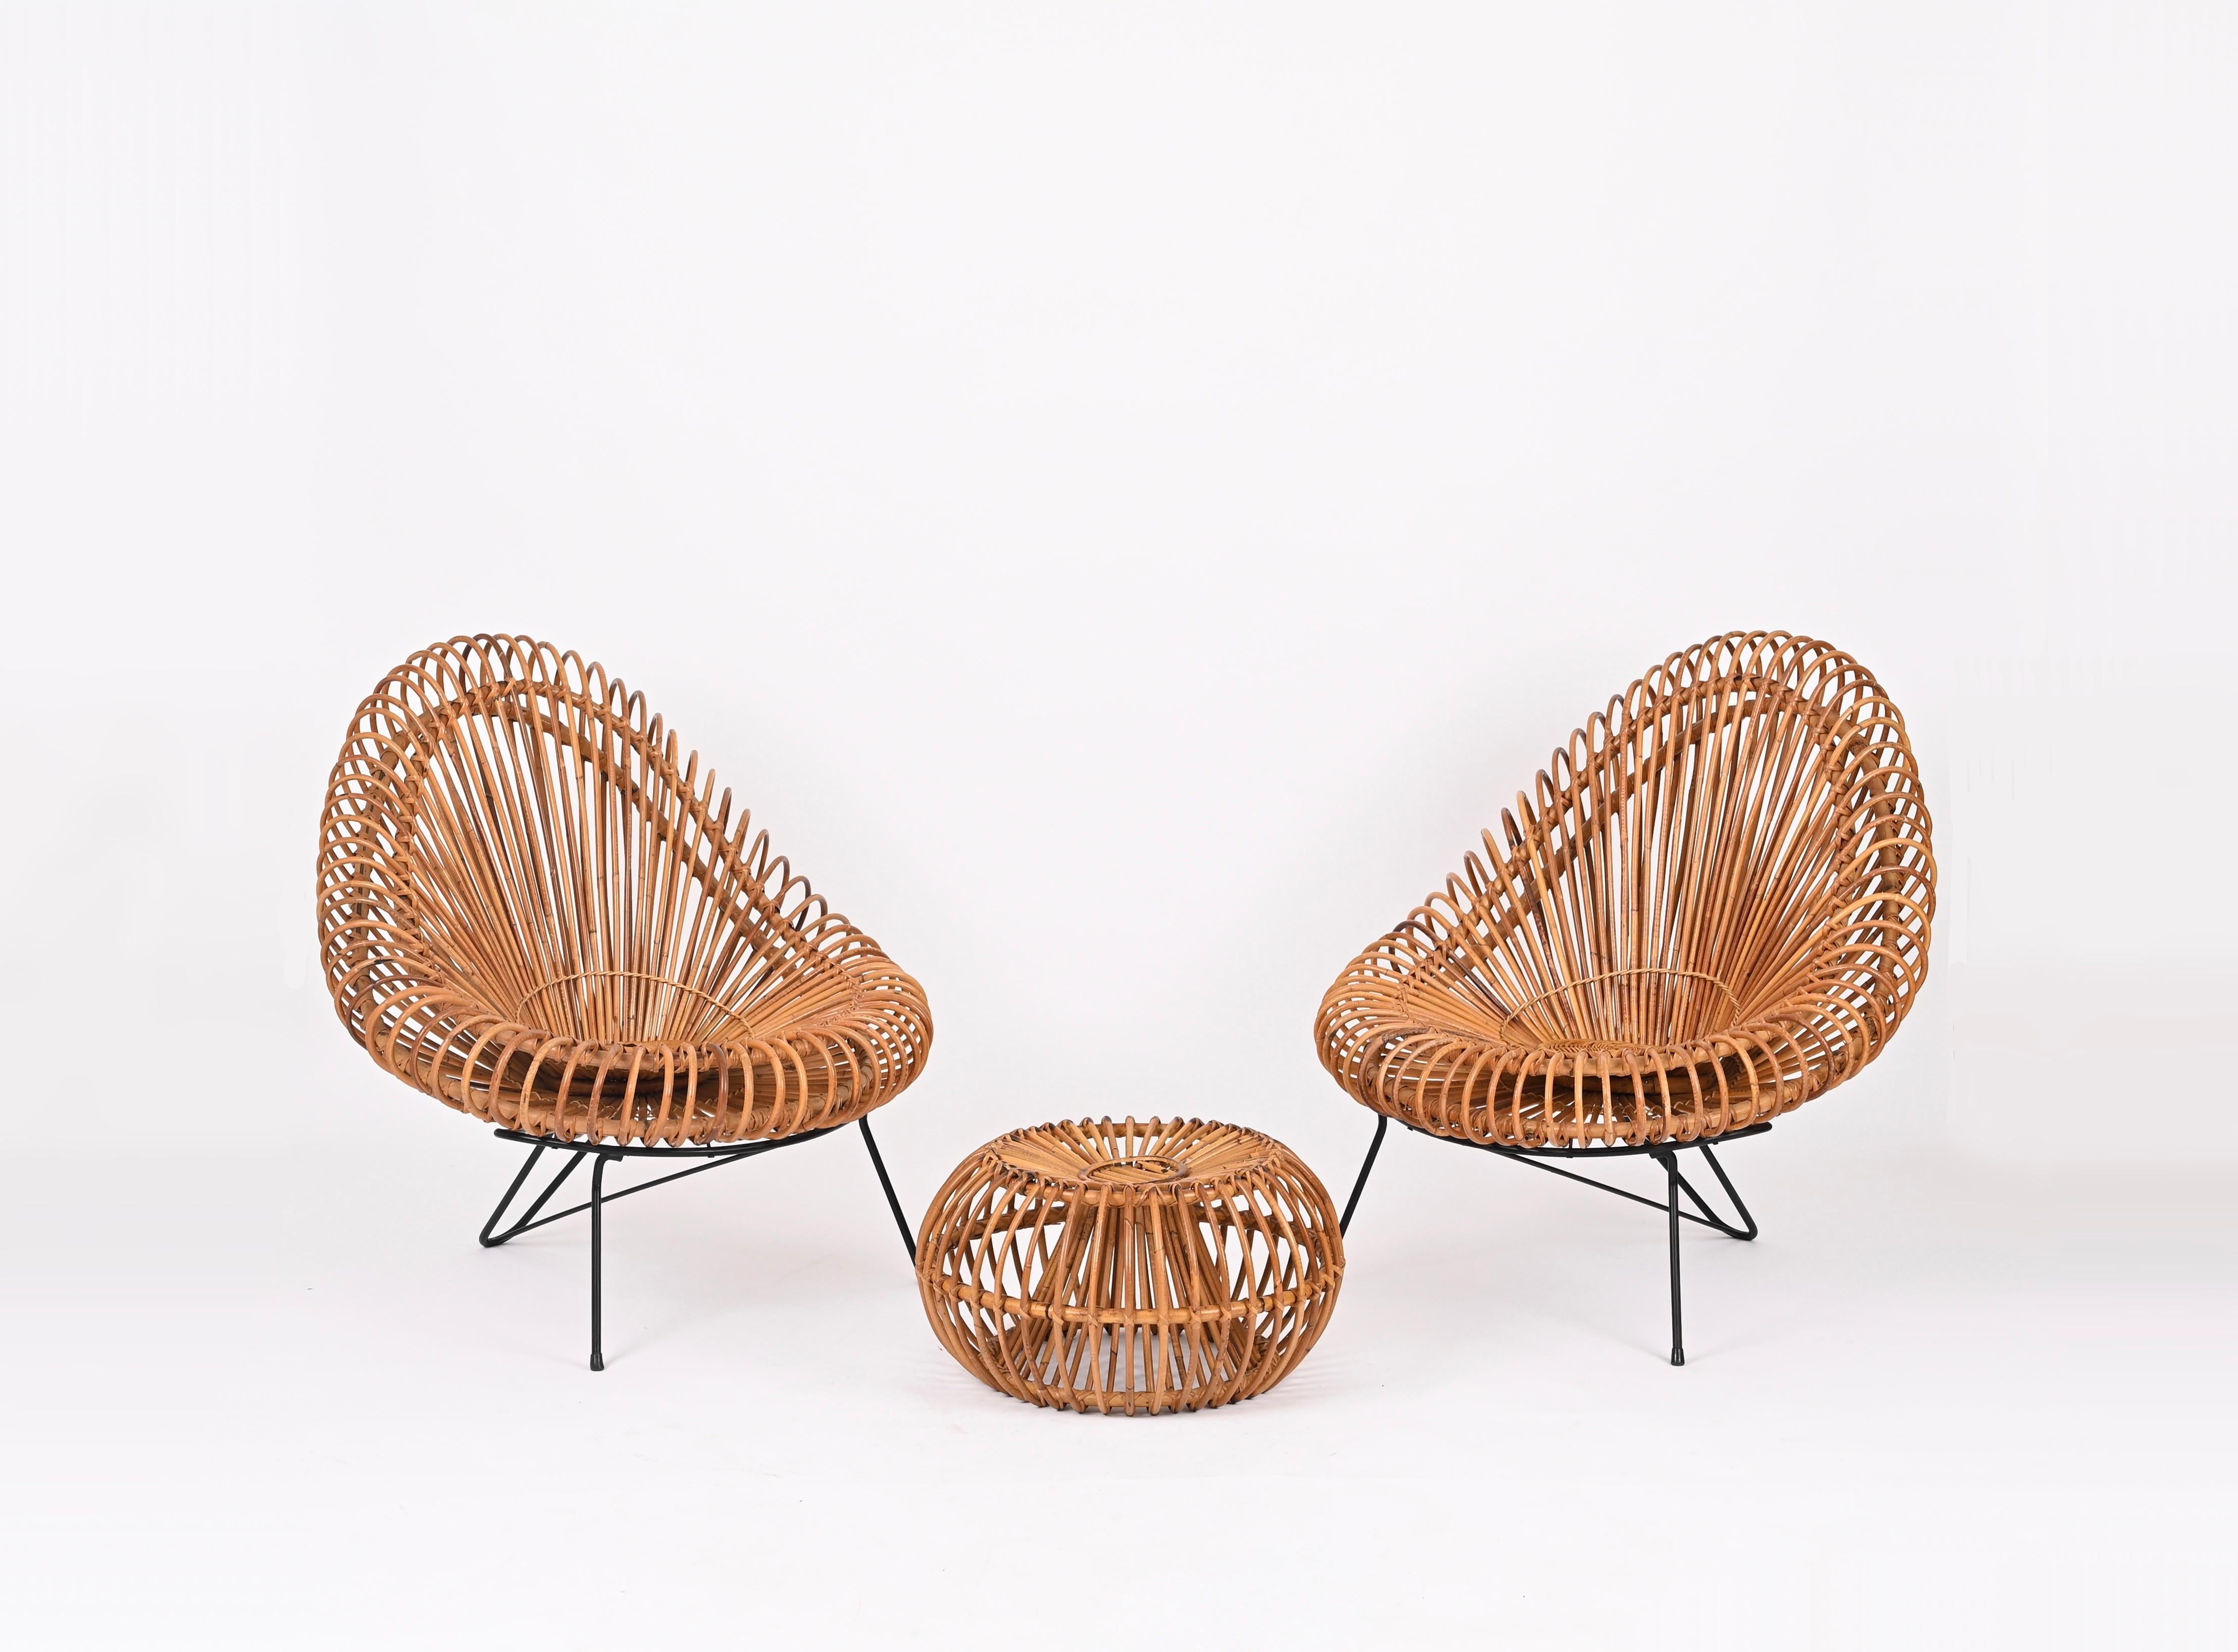 Living Room Rattan Set by Janine Abraham & Dirk Jan Rol - Chairs, Pouf, Mirror  For Sale 6